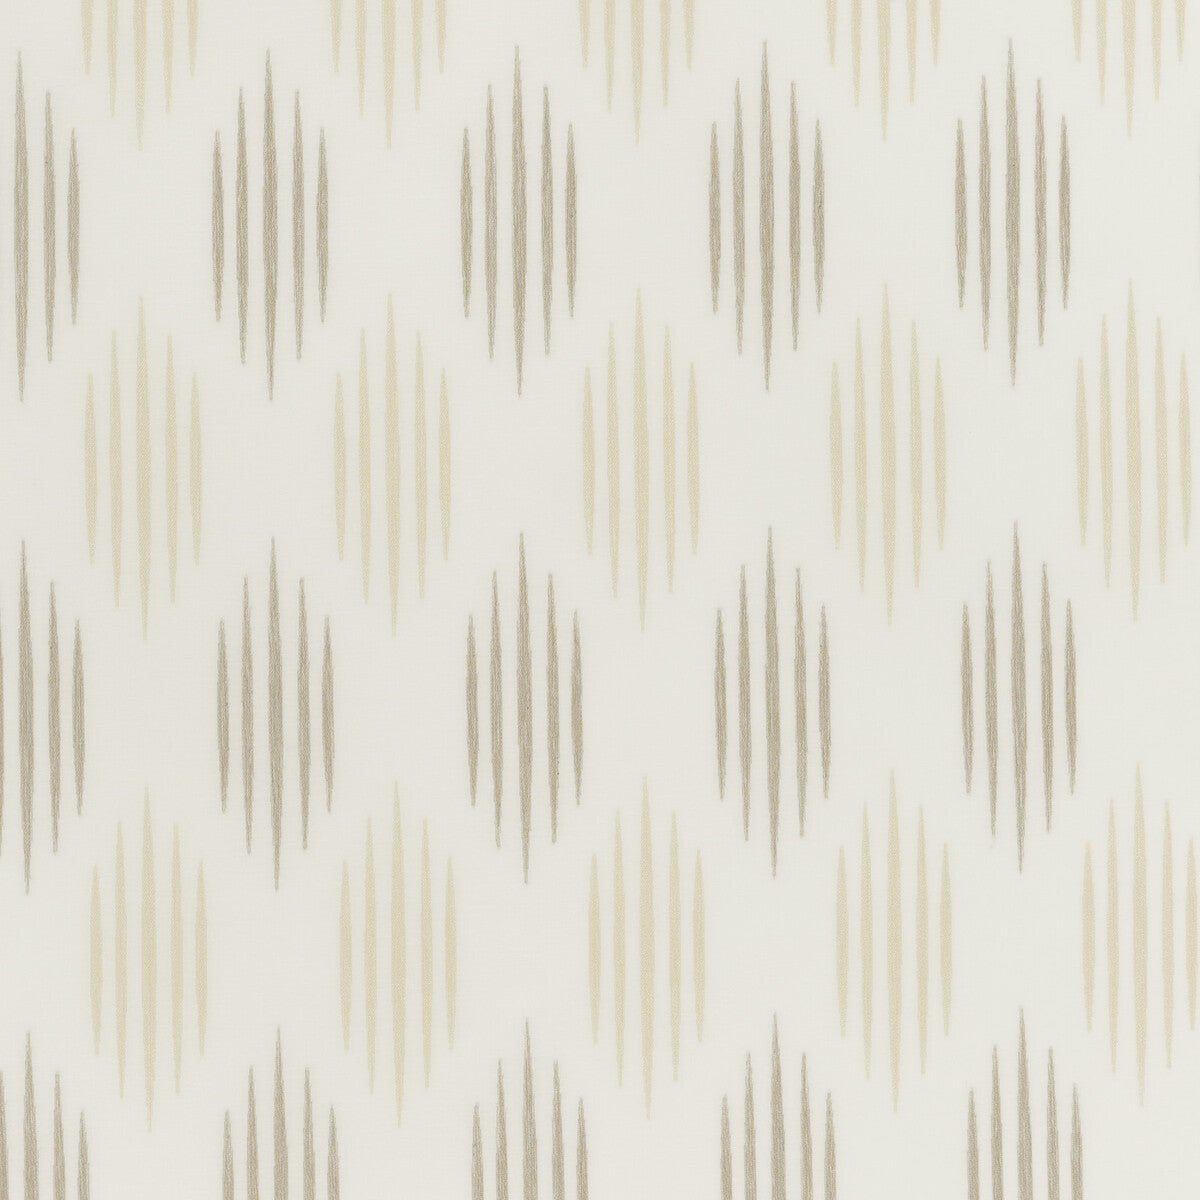 Windward Stripe fabric in polar color - pattern ED95006.100.0 - by Threads in the Meridian collection